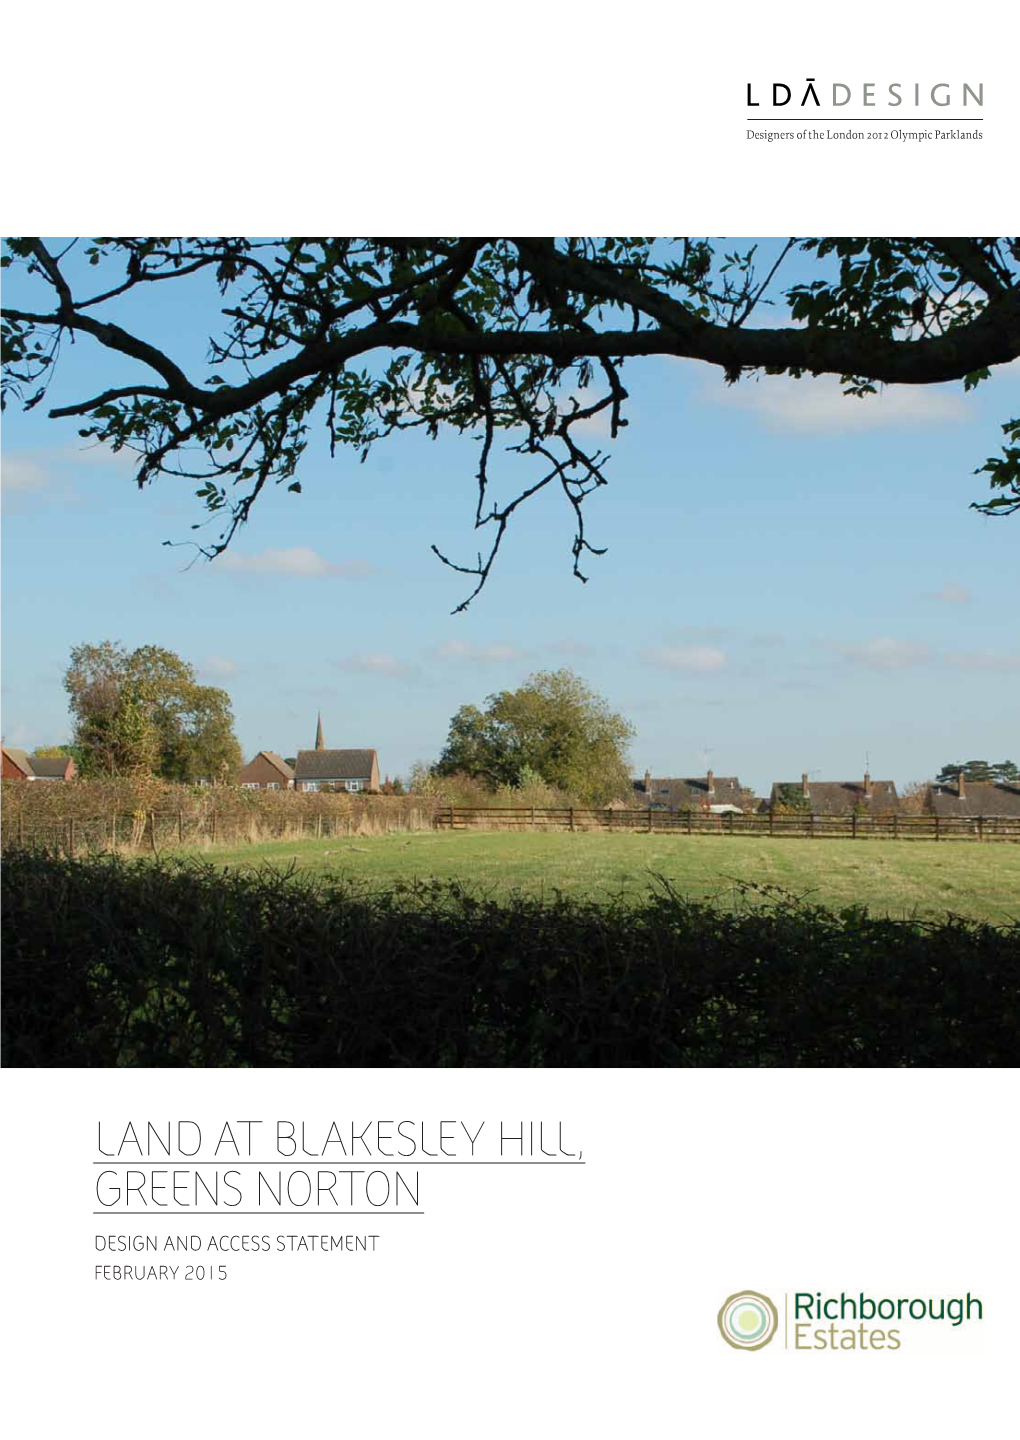 Land at Blakesley Hill, Greens Norton Design and Access Statement FEBRUARY 2015 Version: 2 Version Date: February 2015 Comment Final